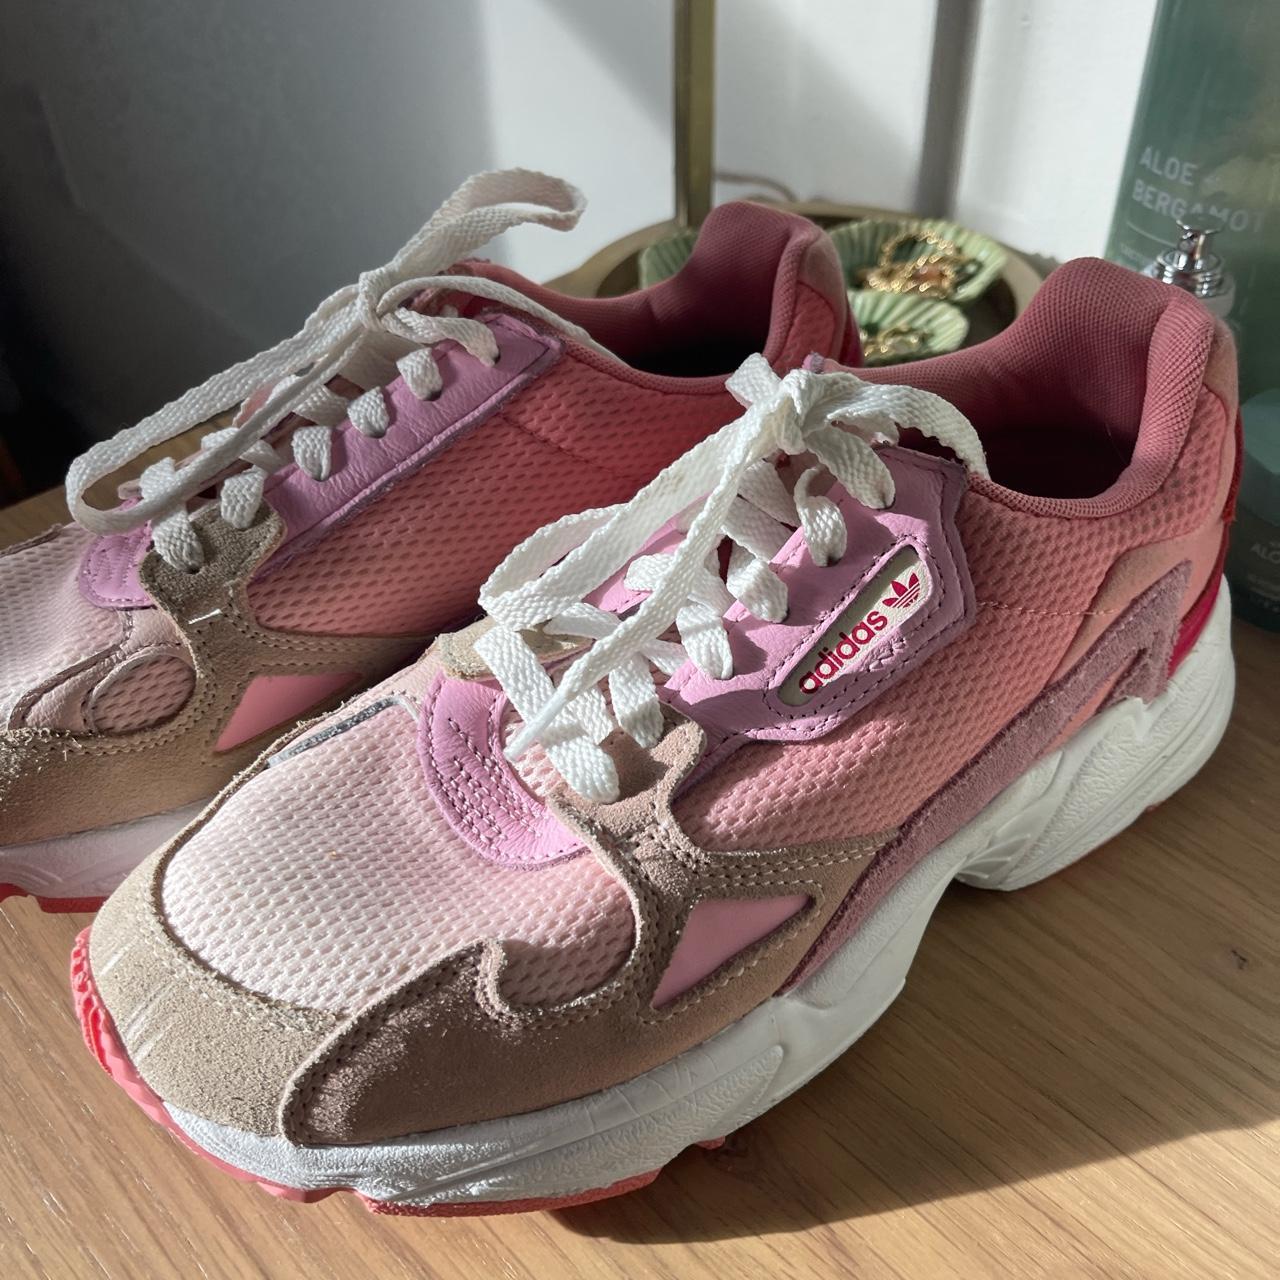 Adidas Women's Pink and Tan Trainers (2)